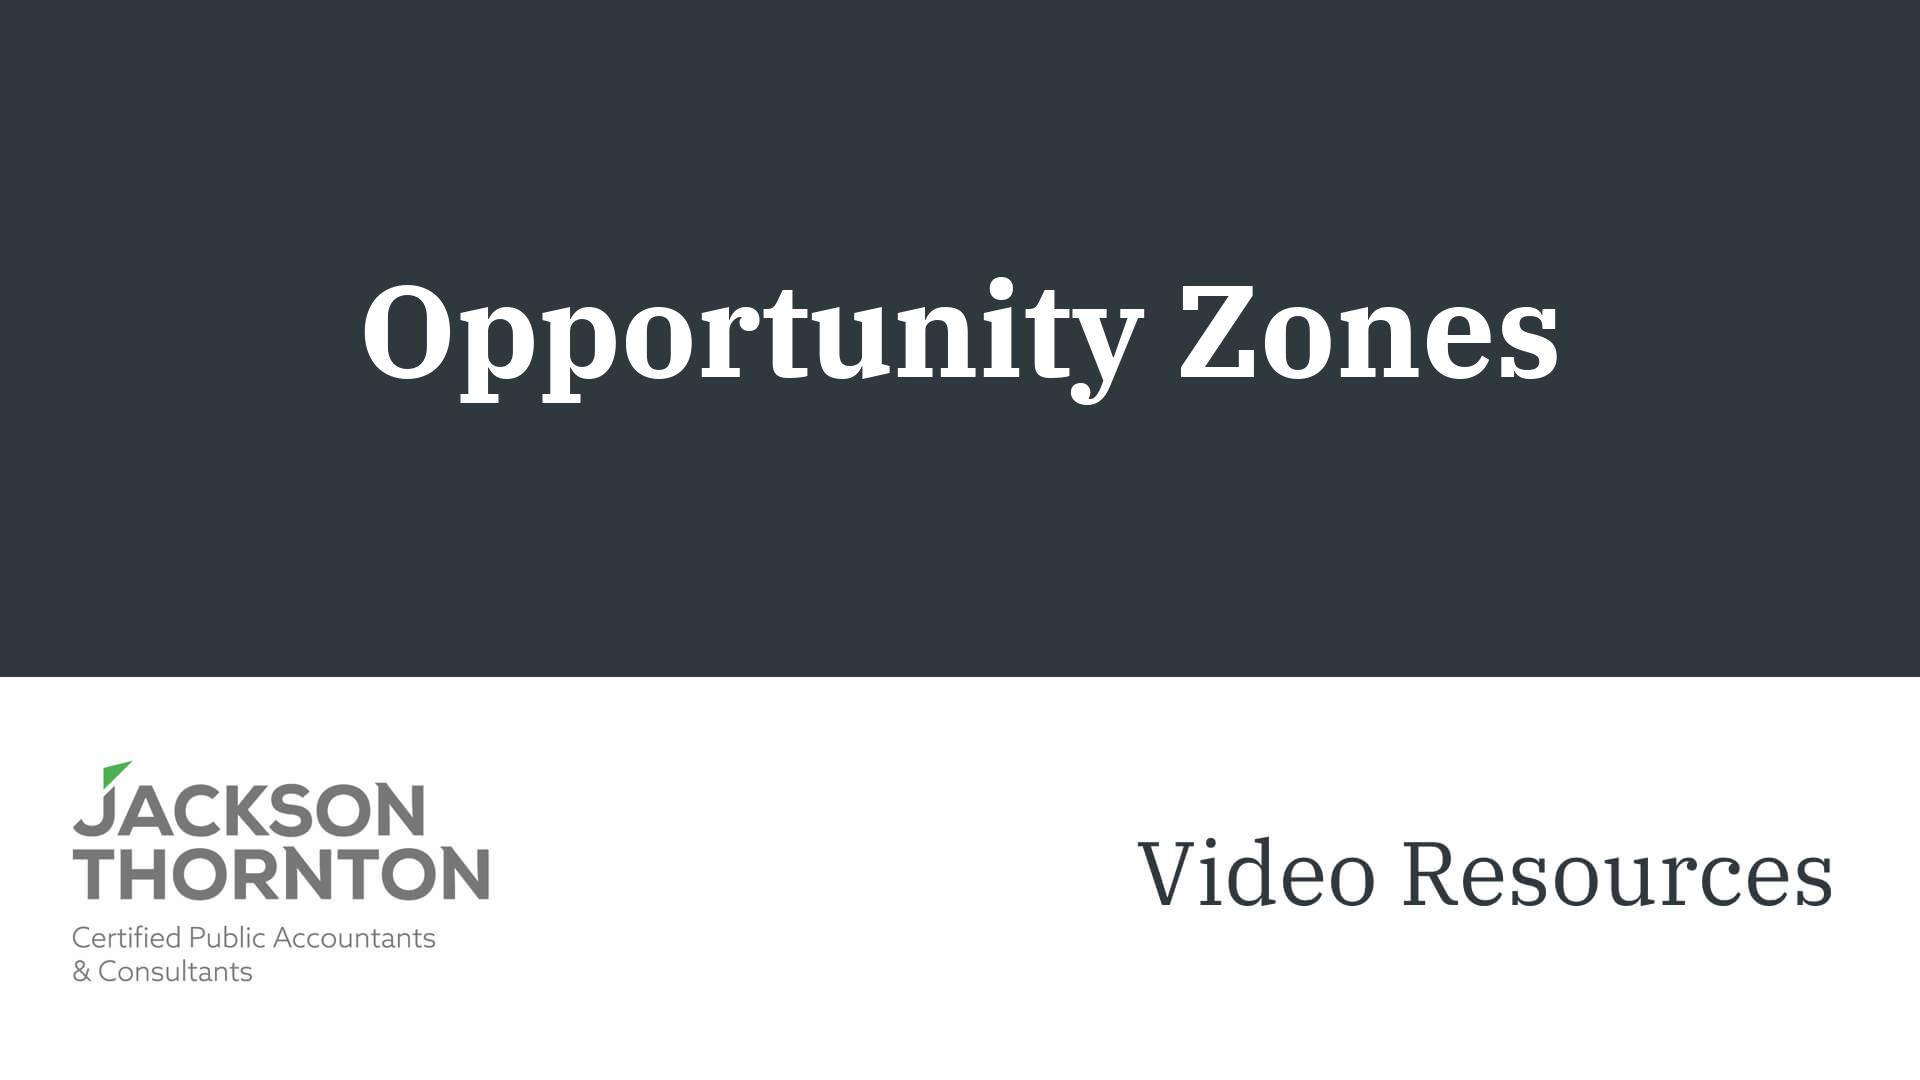 All About Opportunity Zones